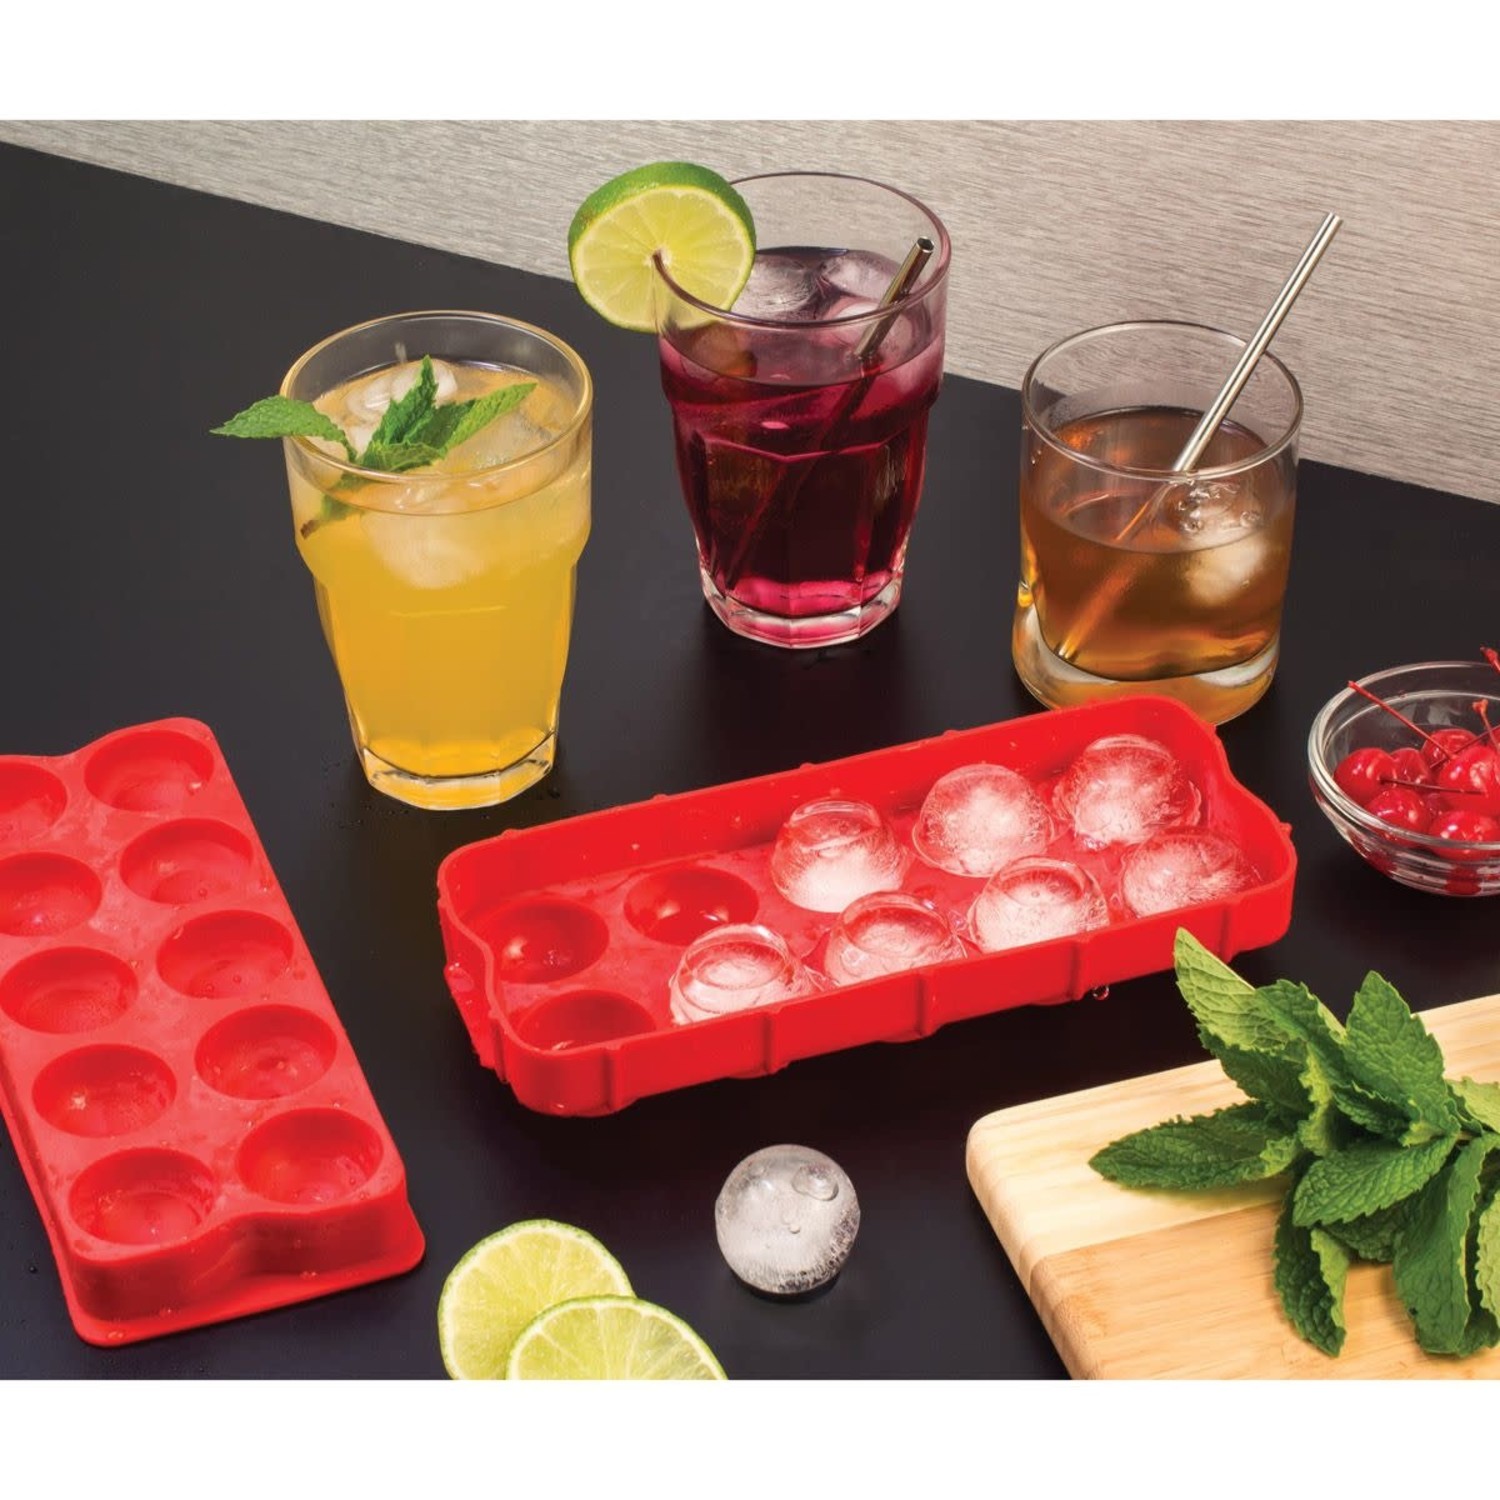 Soup Cubes Freezer Tray Freezer Cubes with Lids and Tray Silicone Ice Cup DIY Bakeware Silicone Star Shaped Cool Ice Tray Chocolate Mold Maker Tools